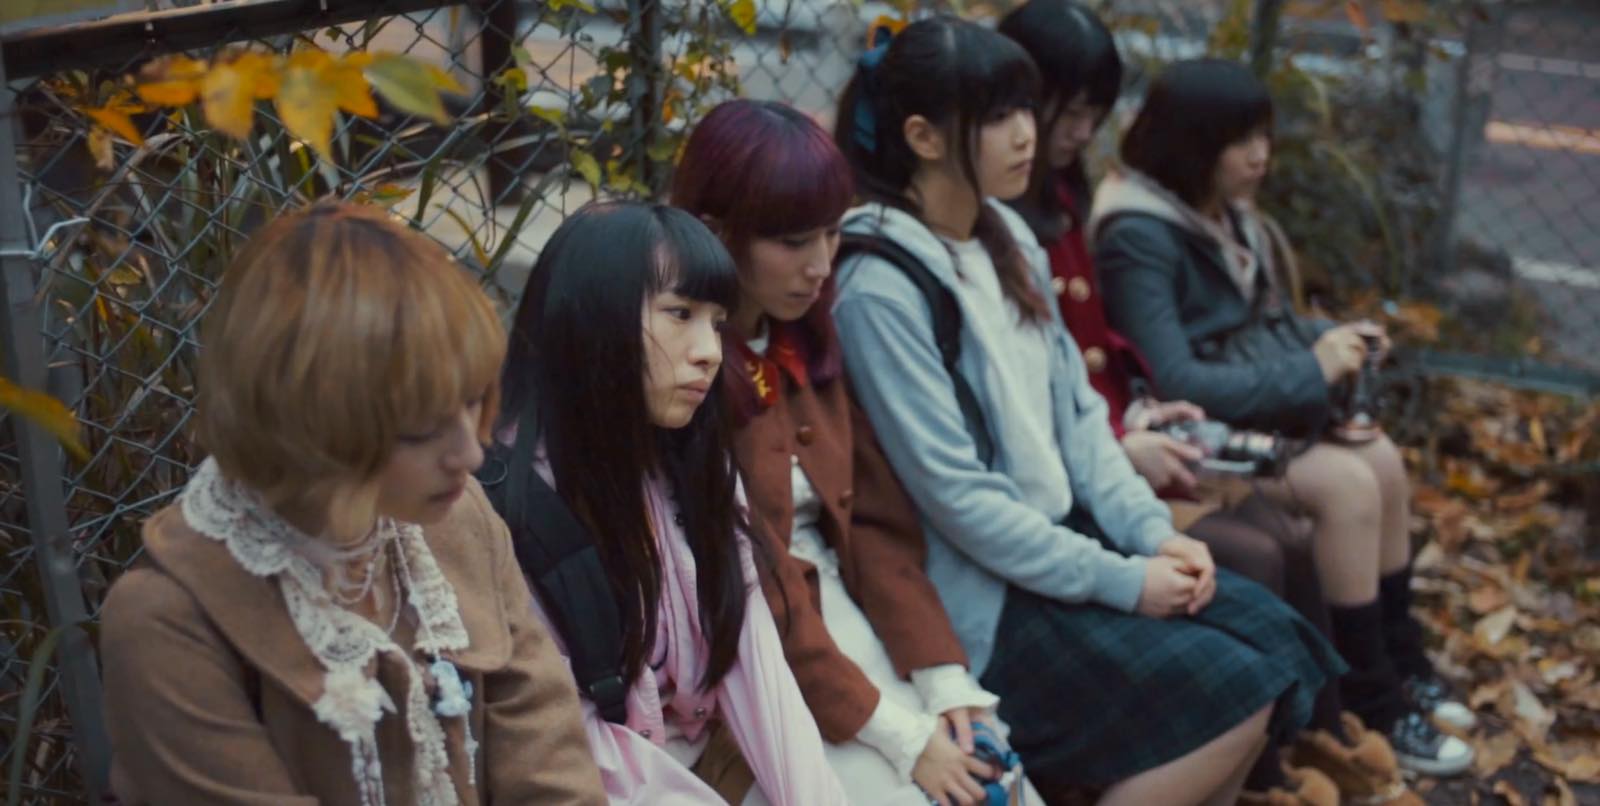 Koutei Camera Girl Expose 2 Sides of Tokyo in MV for “Last Glasgow/Trip with Mr.Sadness”!